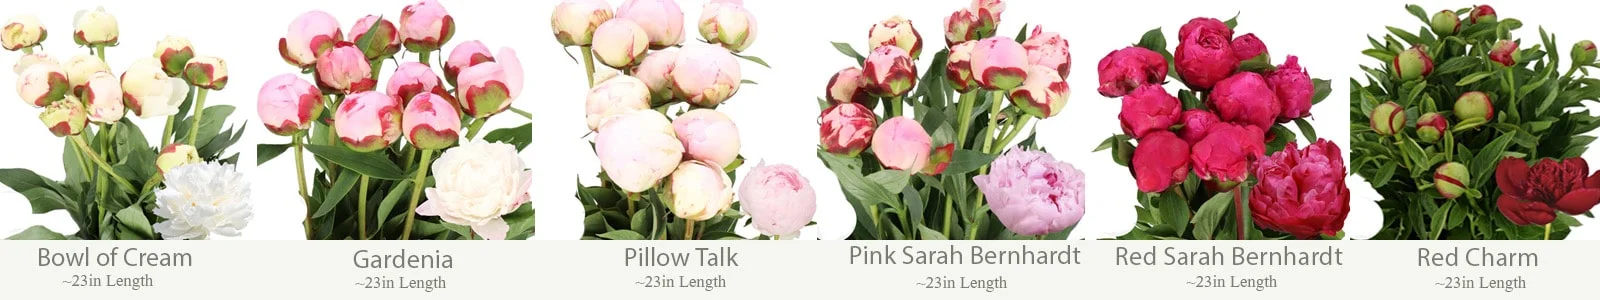 Whole Blossoms' fresh, vibrant wholesale peonies - perfect for elevating wedding and event ambiance.